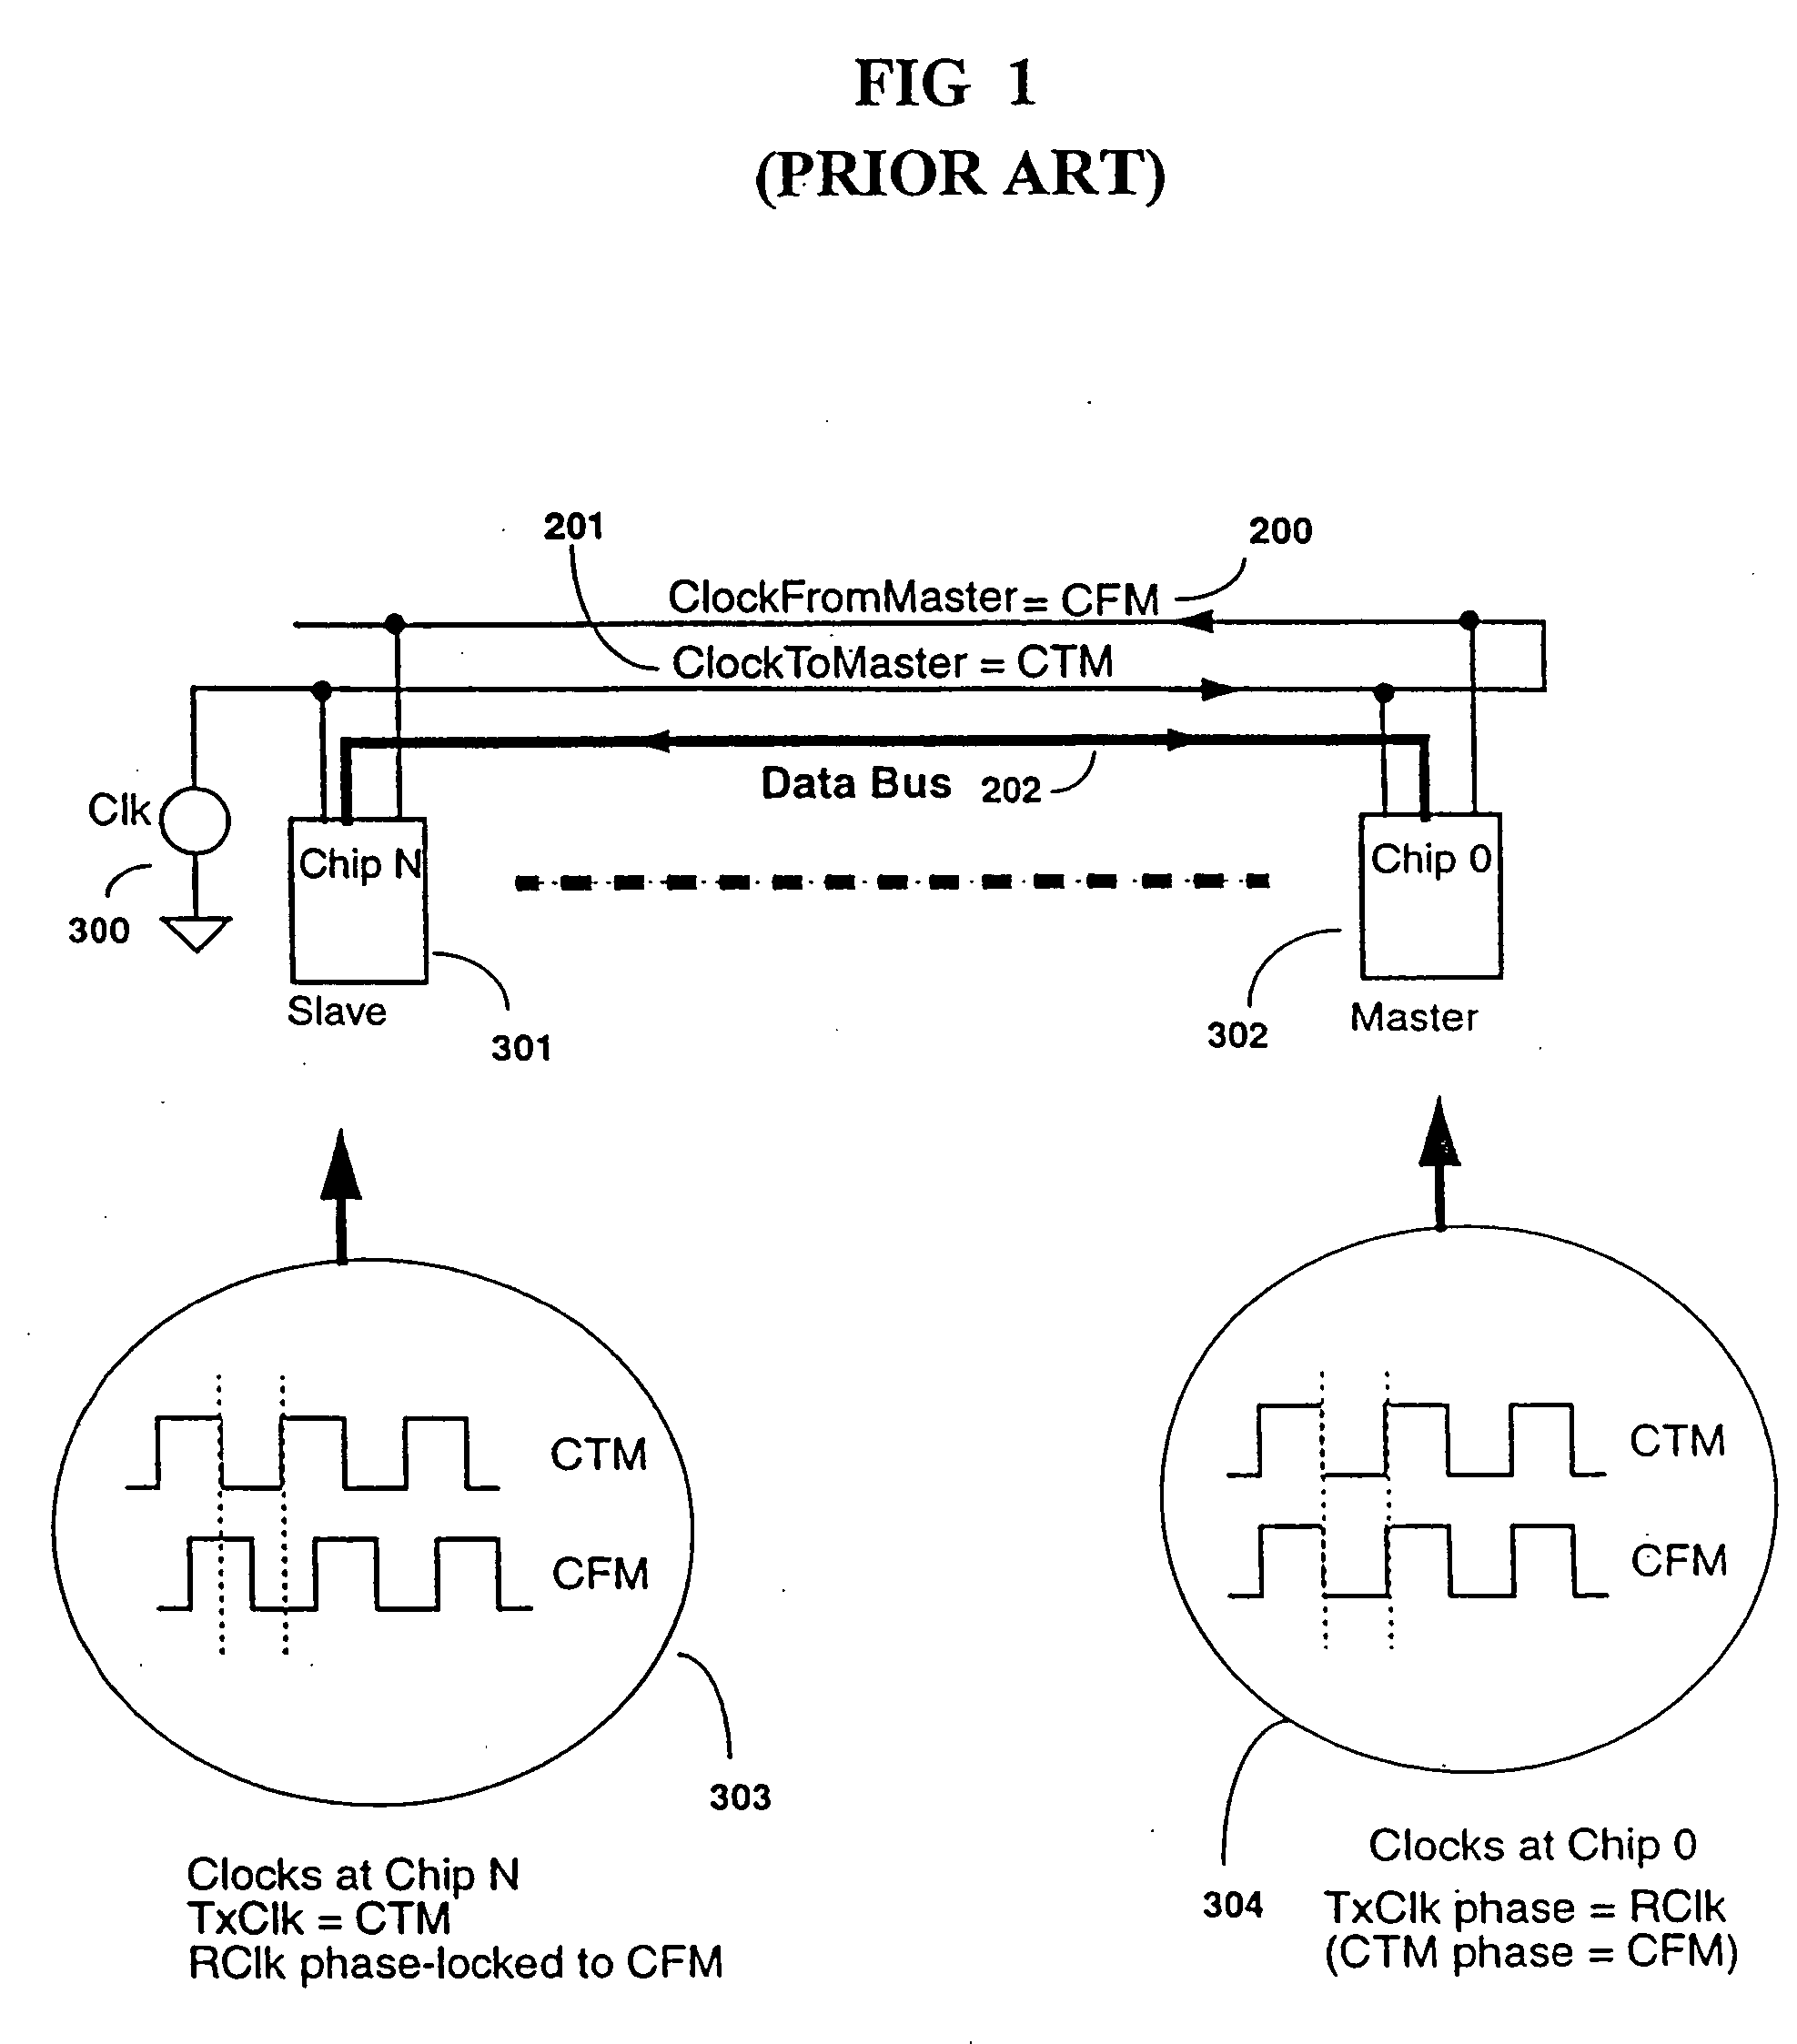 Method and apparatus for fail-safe resynchronization with minimum latency